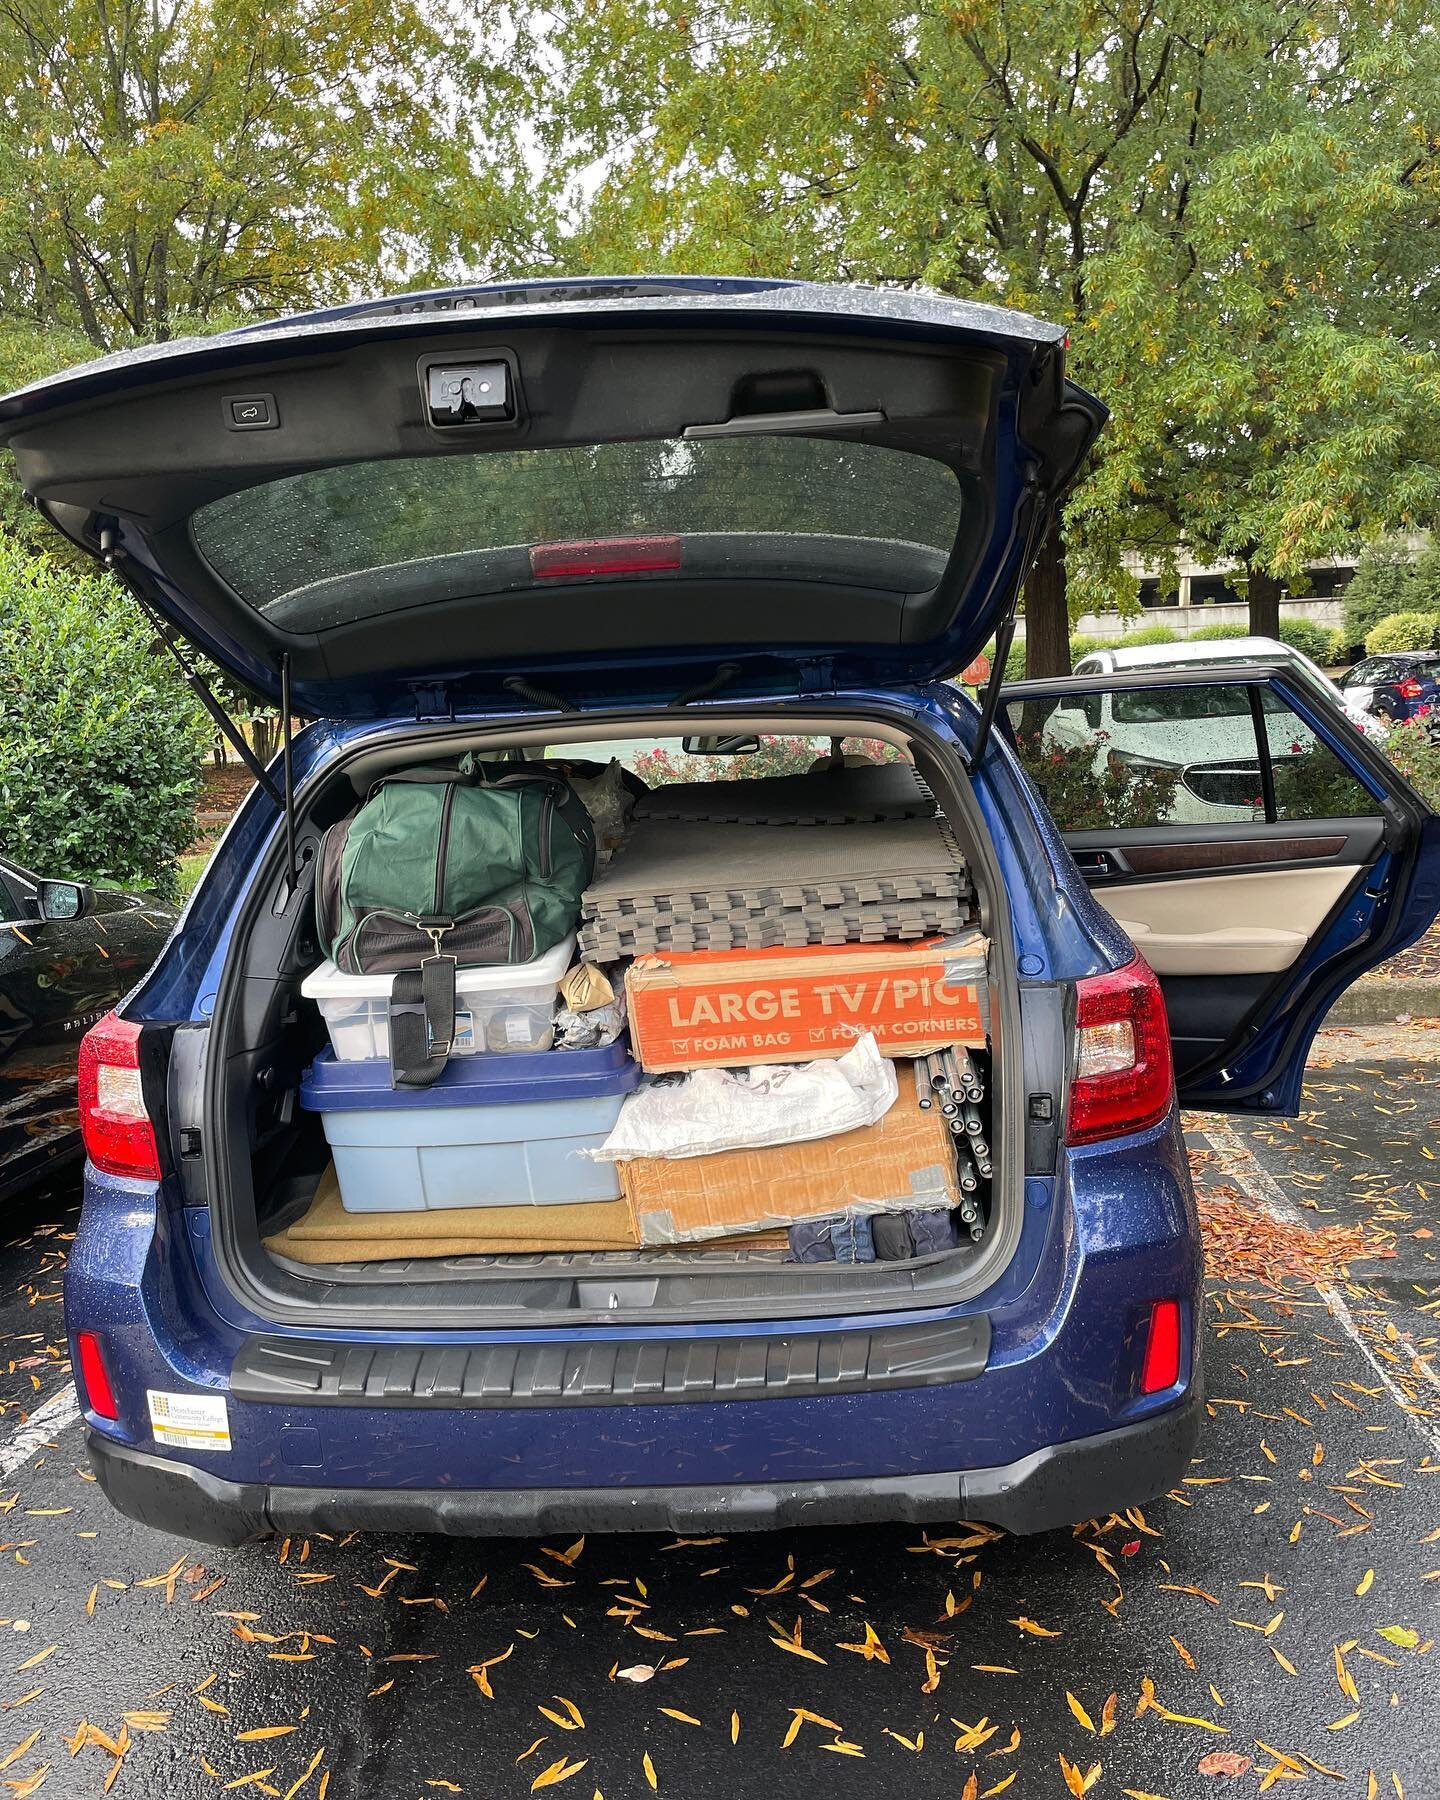 All packed up and heading north from Richmond. Thanks to @visartsrva for a great show at #craftanddesign2022 ! Much fun and many new friends.